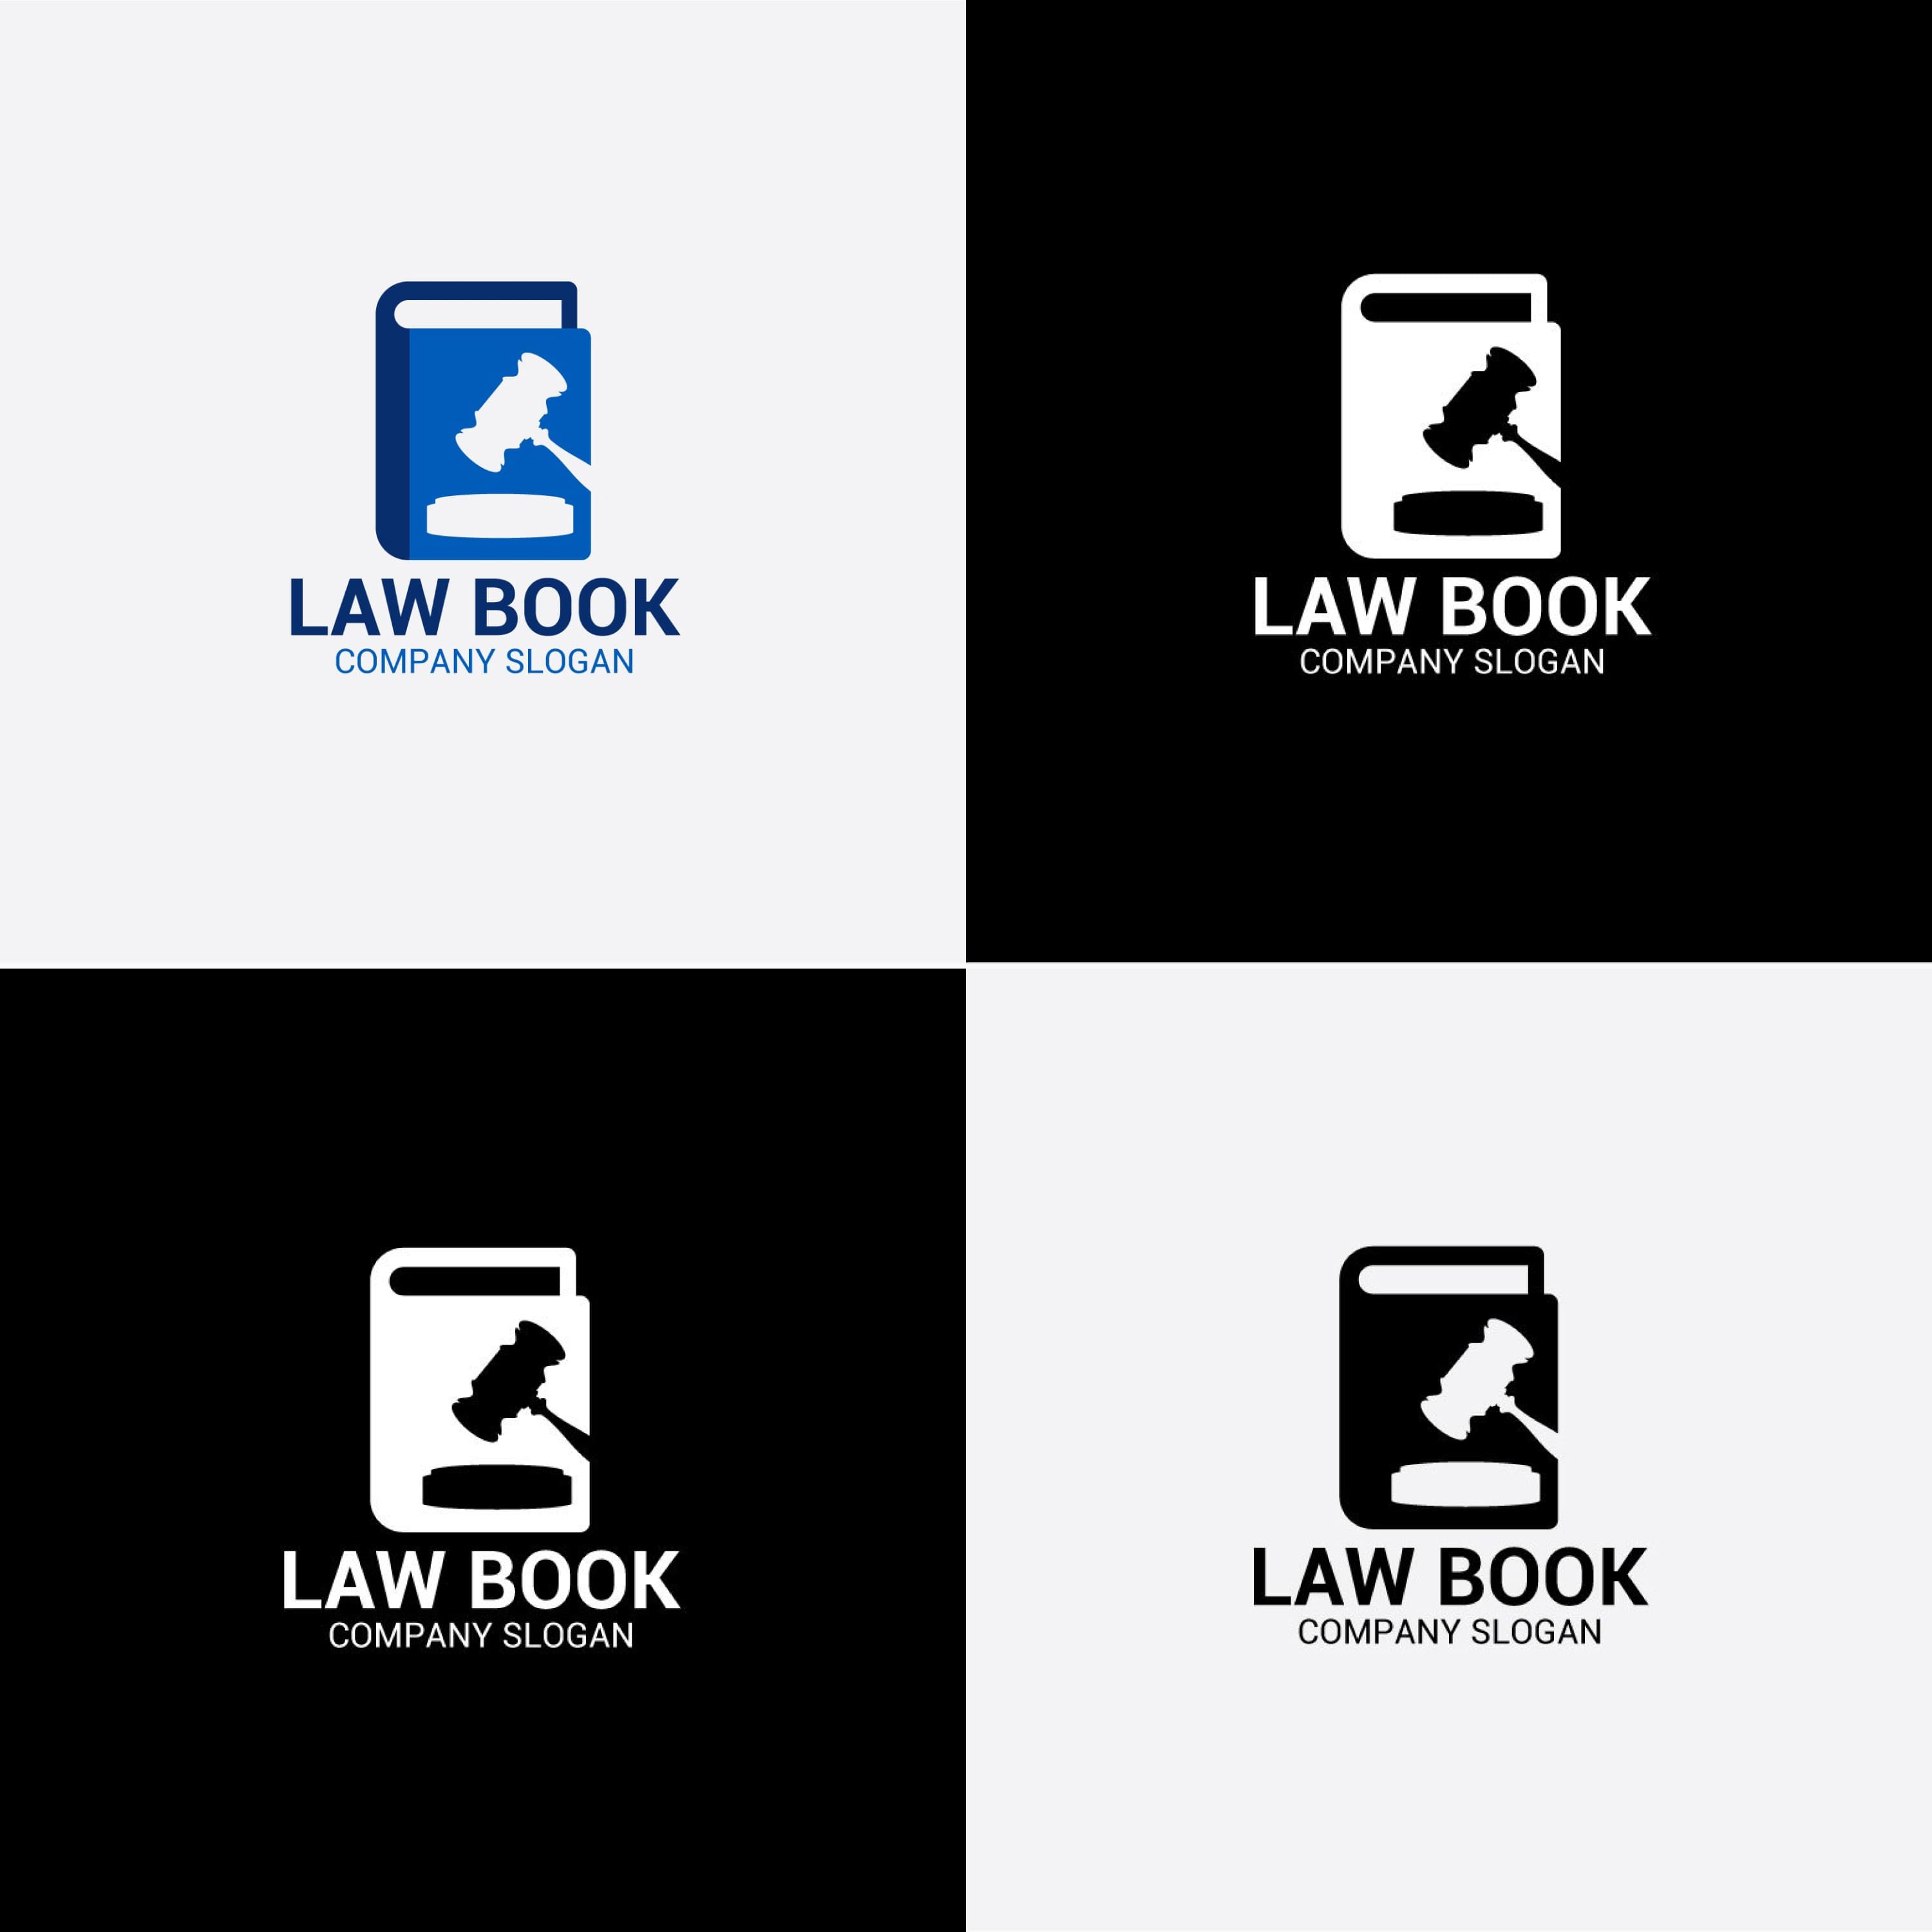 LAW BOOK LOGO cover.